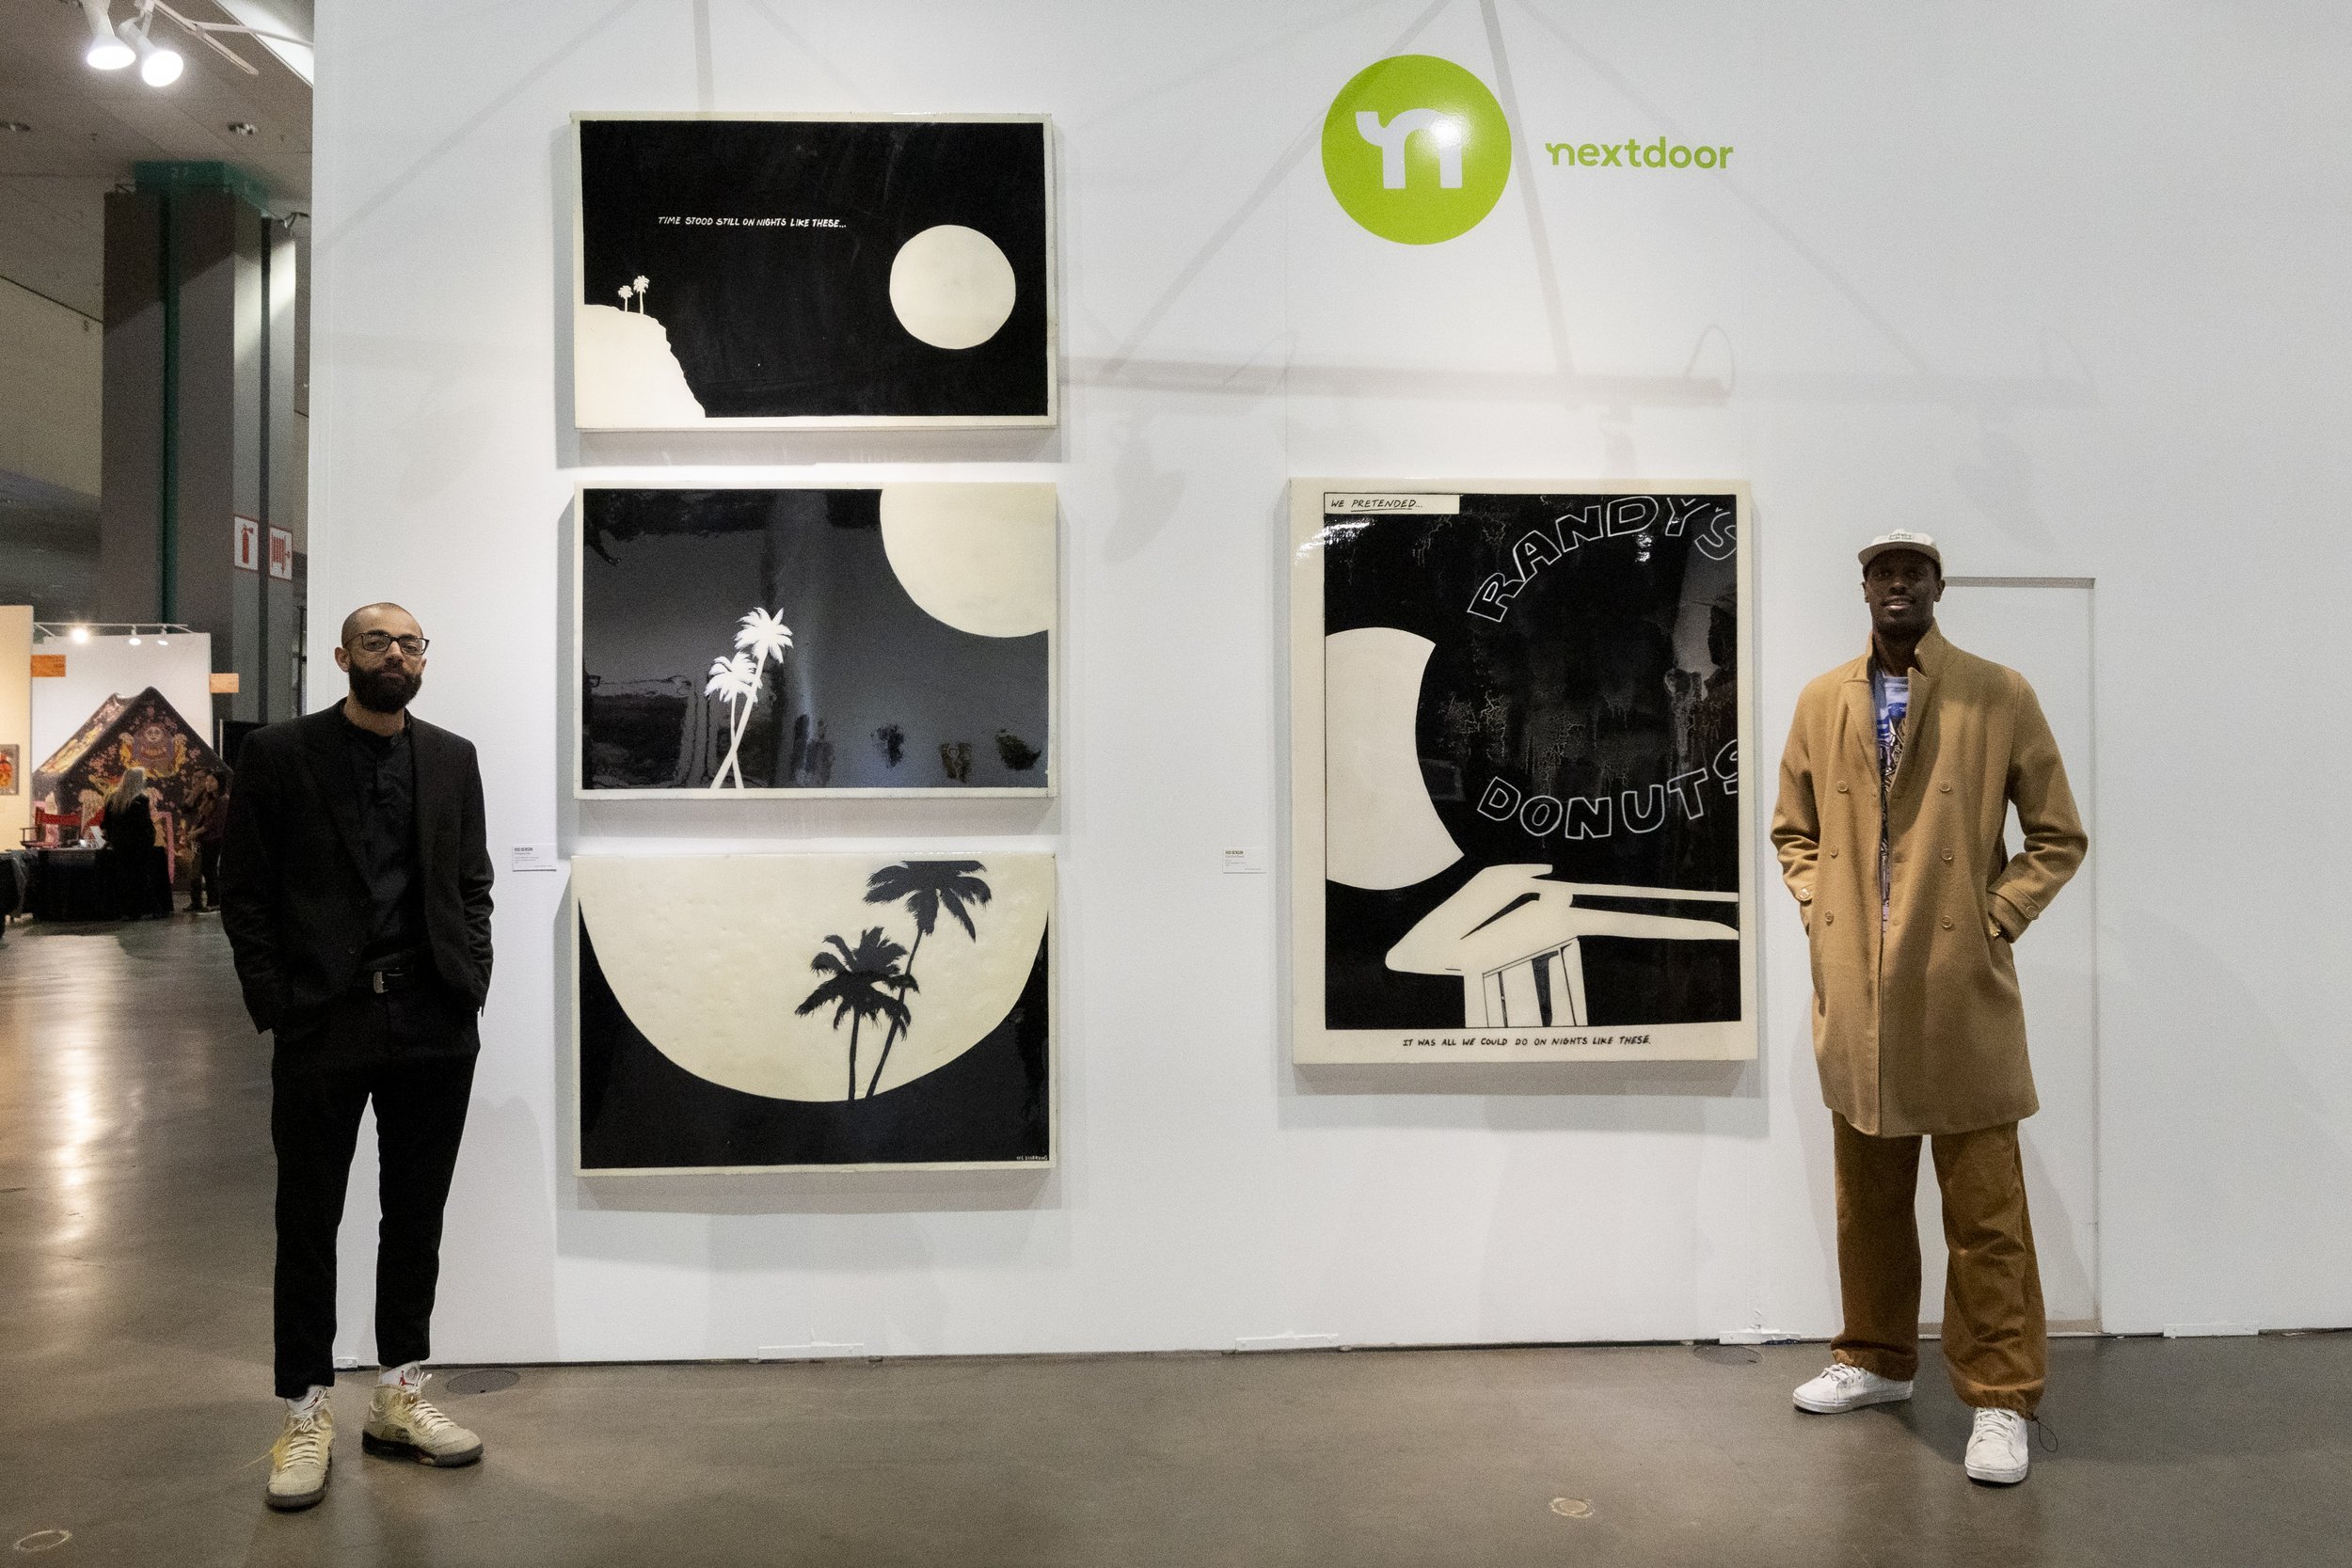  L-R curator Josiah David Jones and artist Rod Benson from neighbors of Next-door partnered with LA Art Show in honor of Black History Month to celebrate the power of community and art at the four day LA Art Show Showcase presented at the Convention 